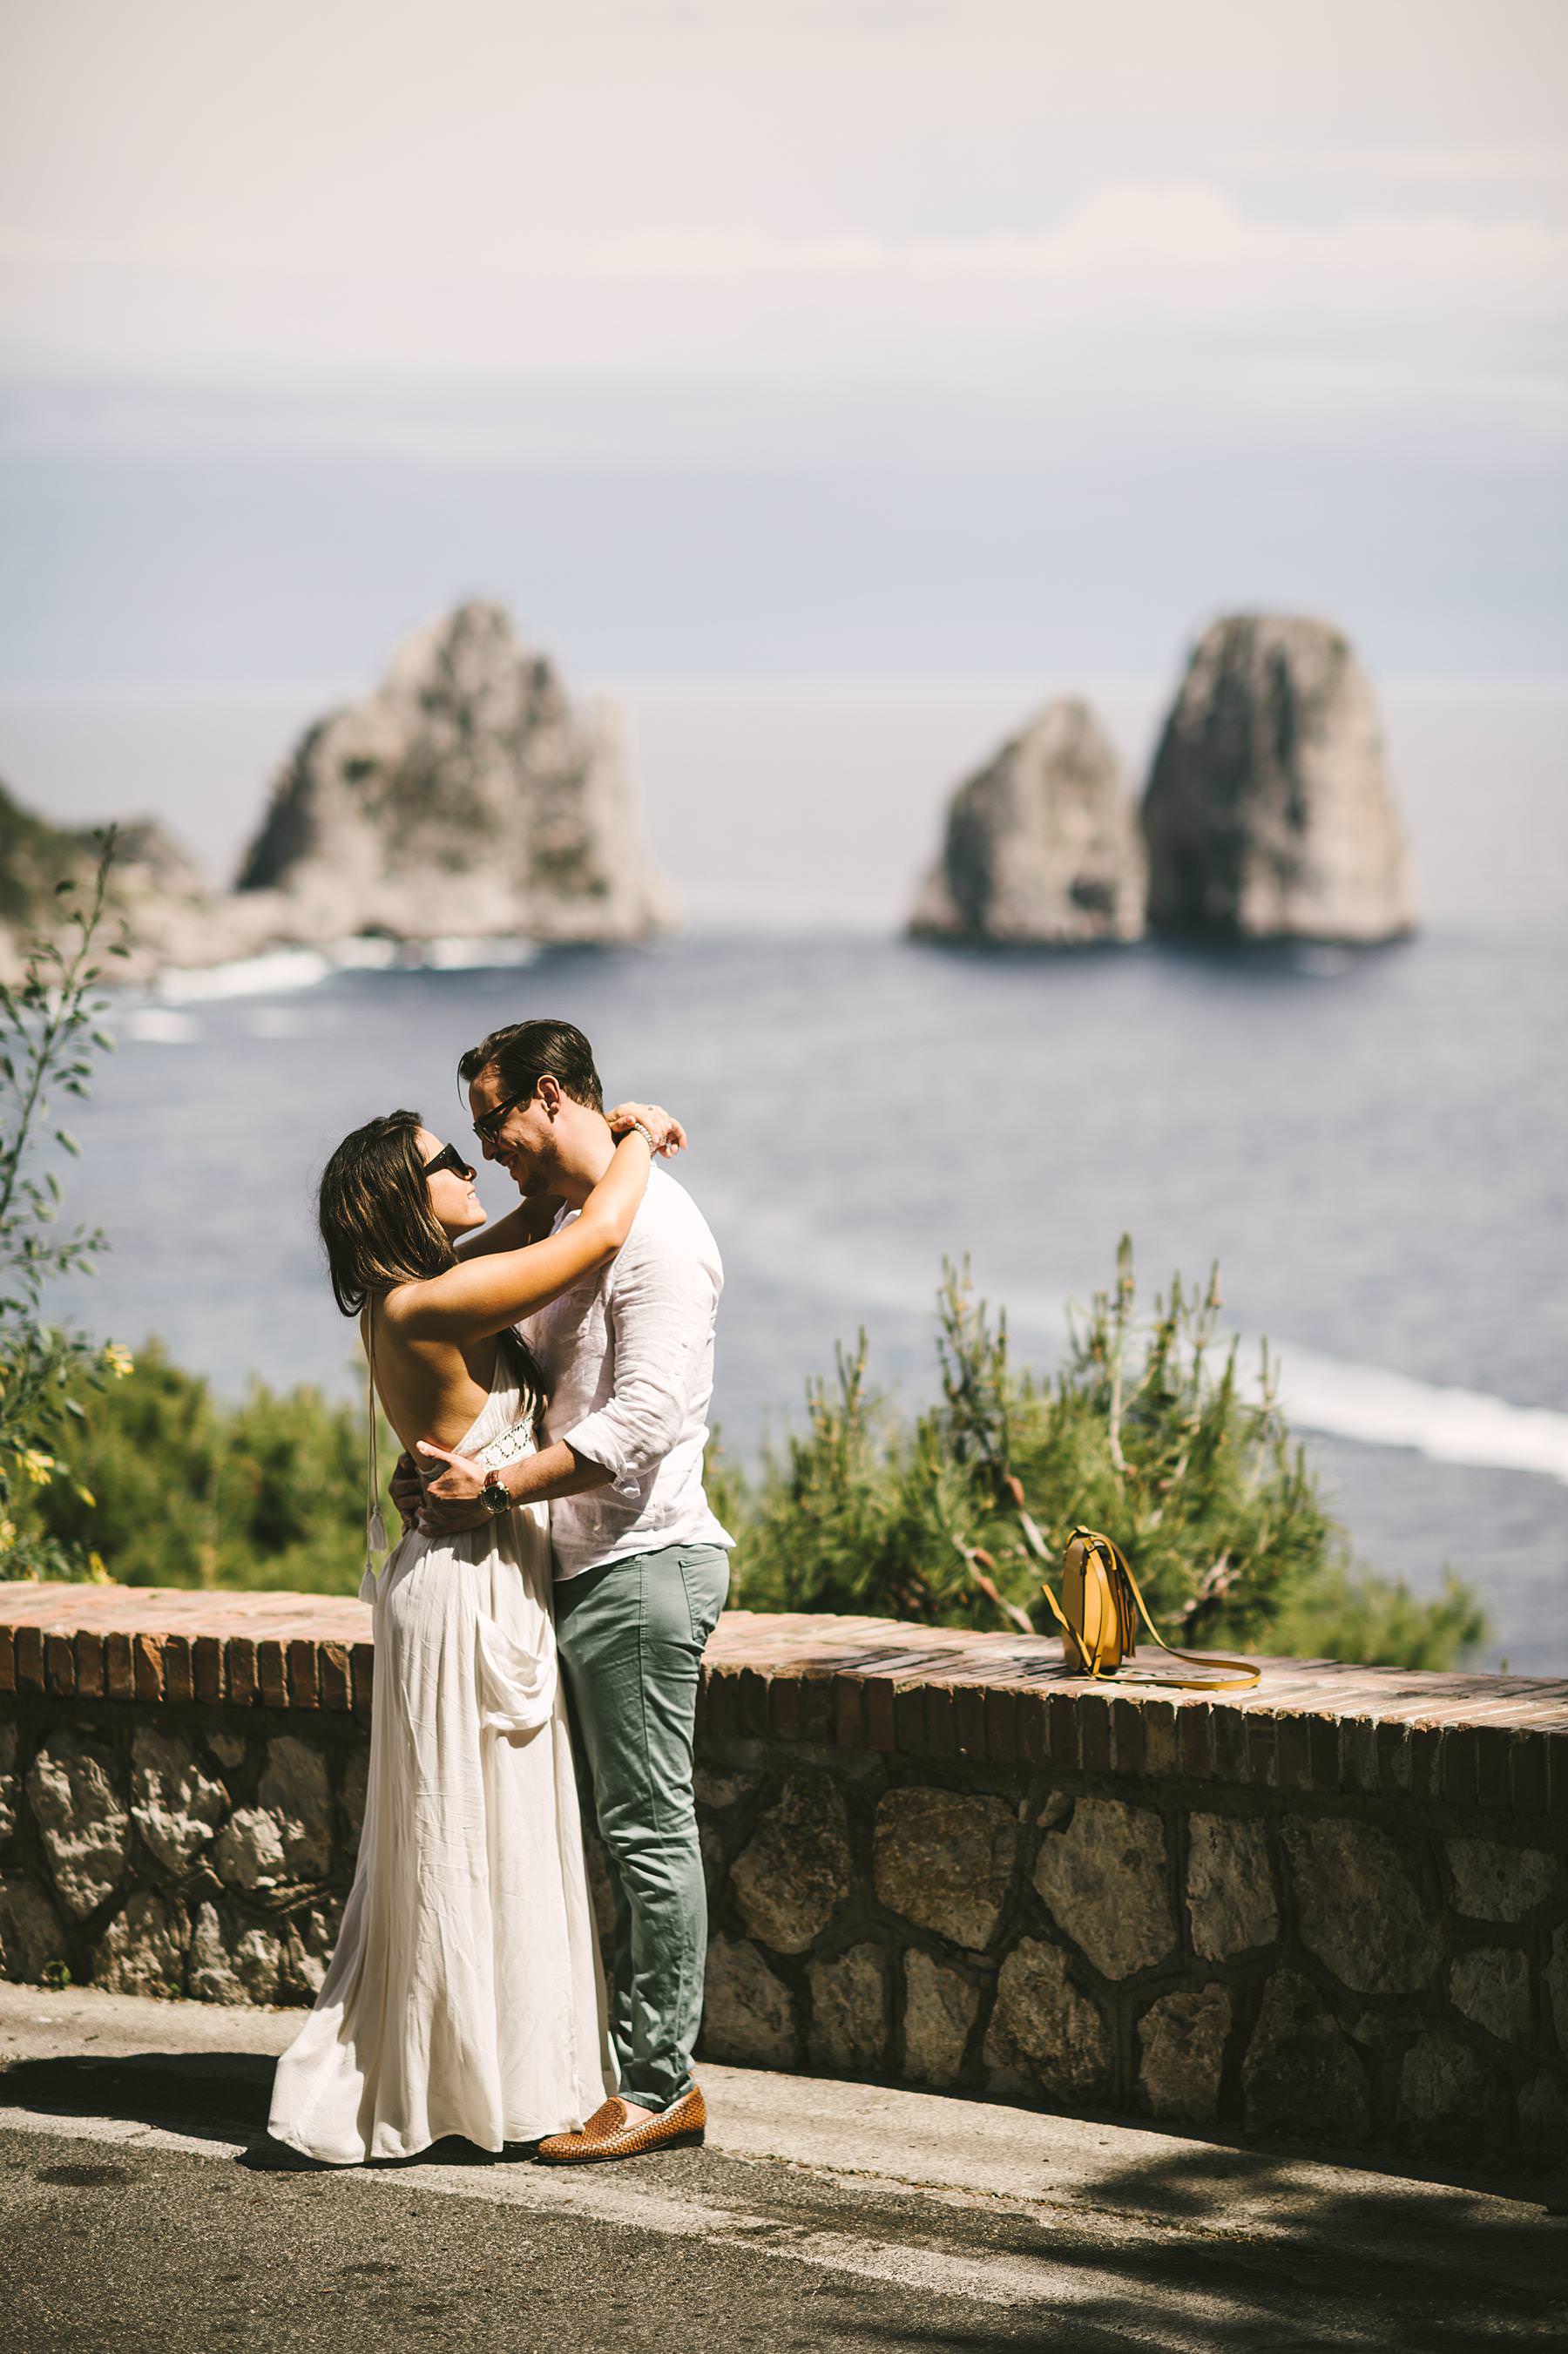 Couple portrait engagement pre-wedding photo session in a scenic road with breathtaking sea stacks of Capri island